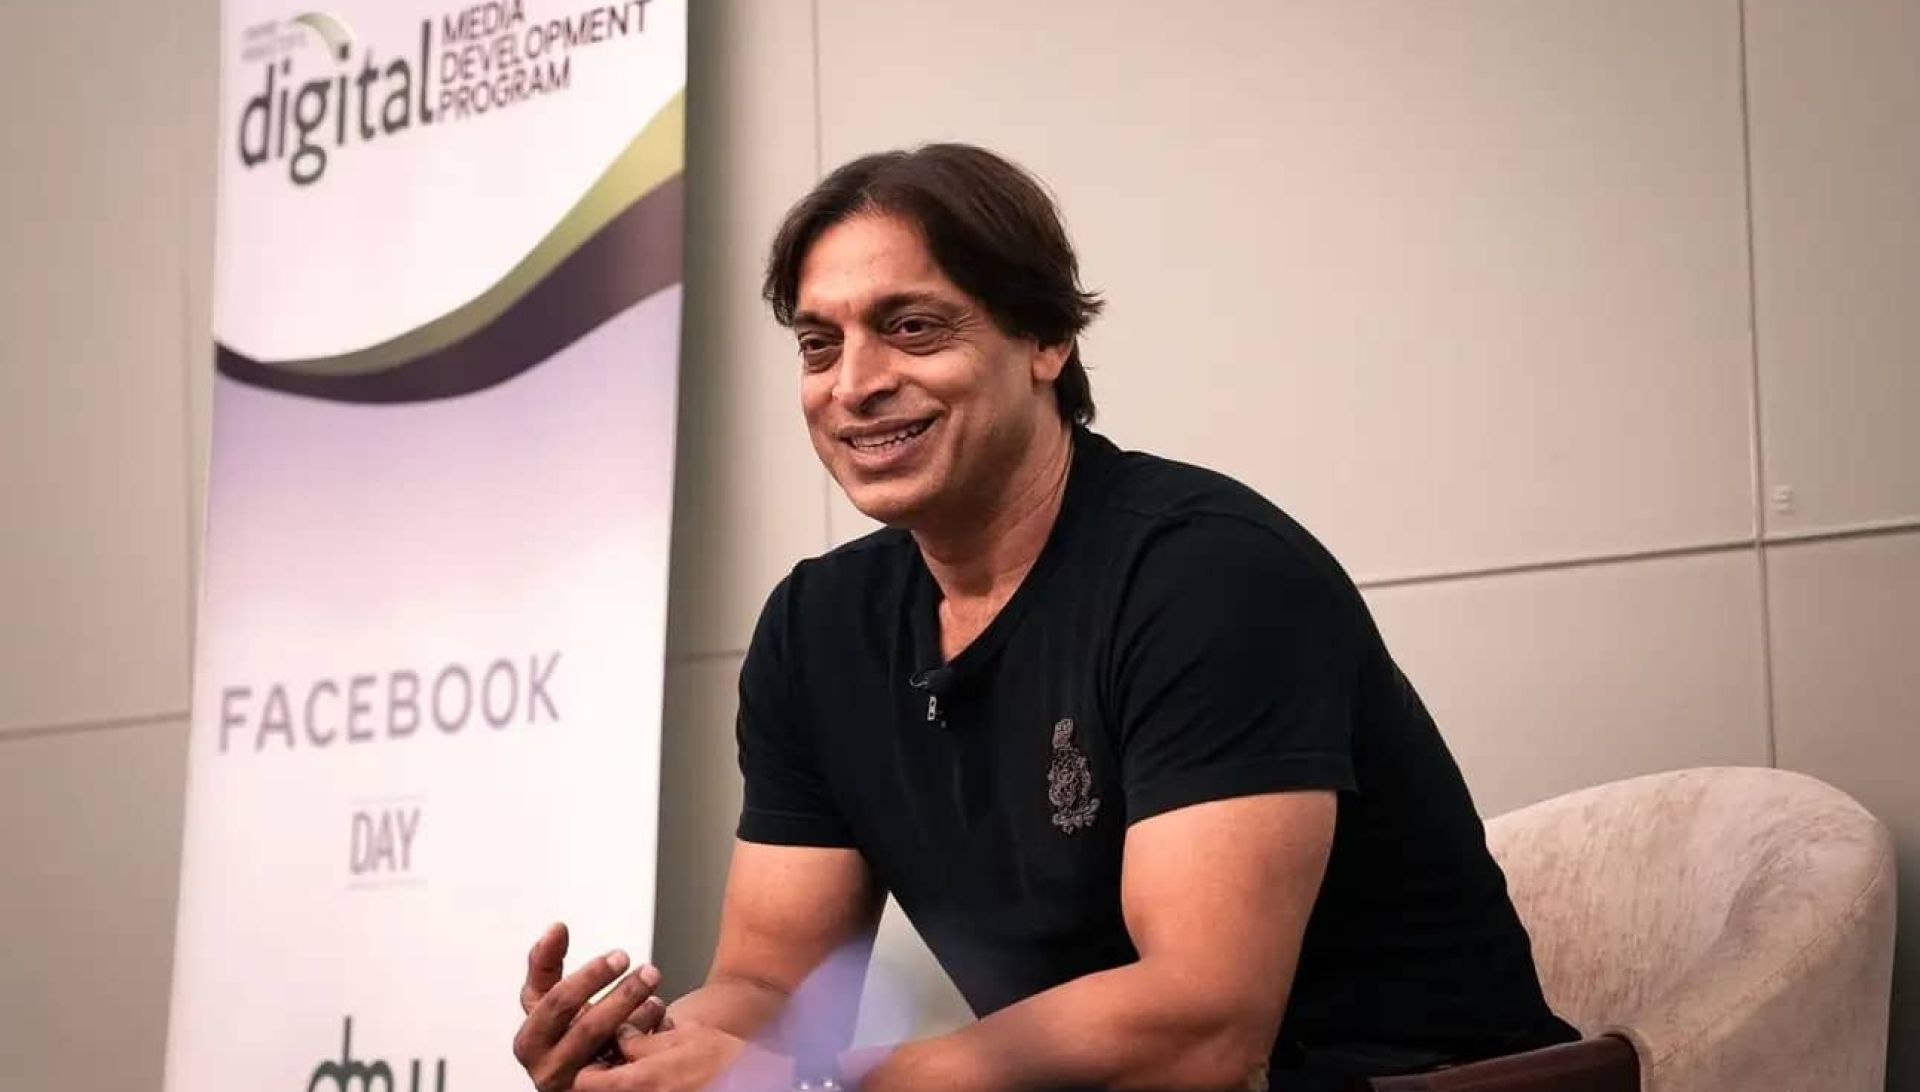 Watch: Shoaib Akhtar resigns on Live TV in presence of Viv Richards after spat with anchor